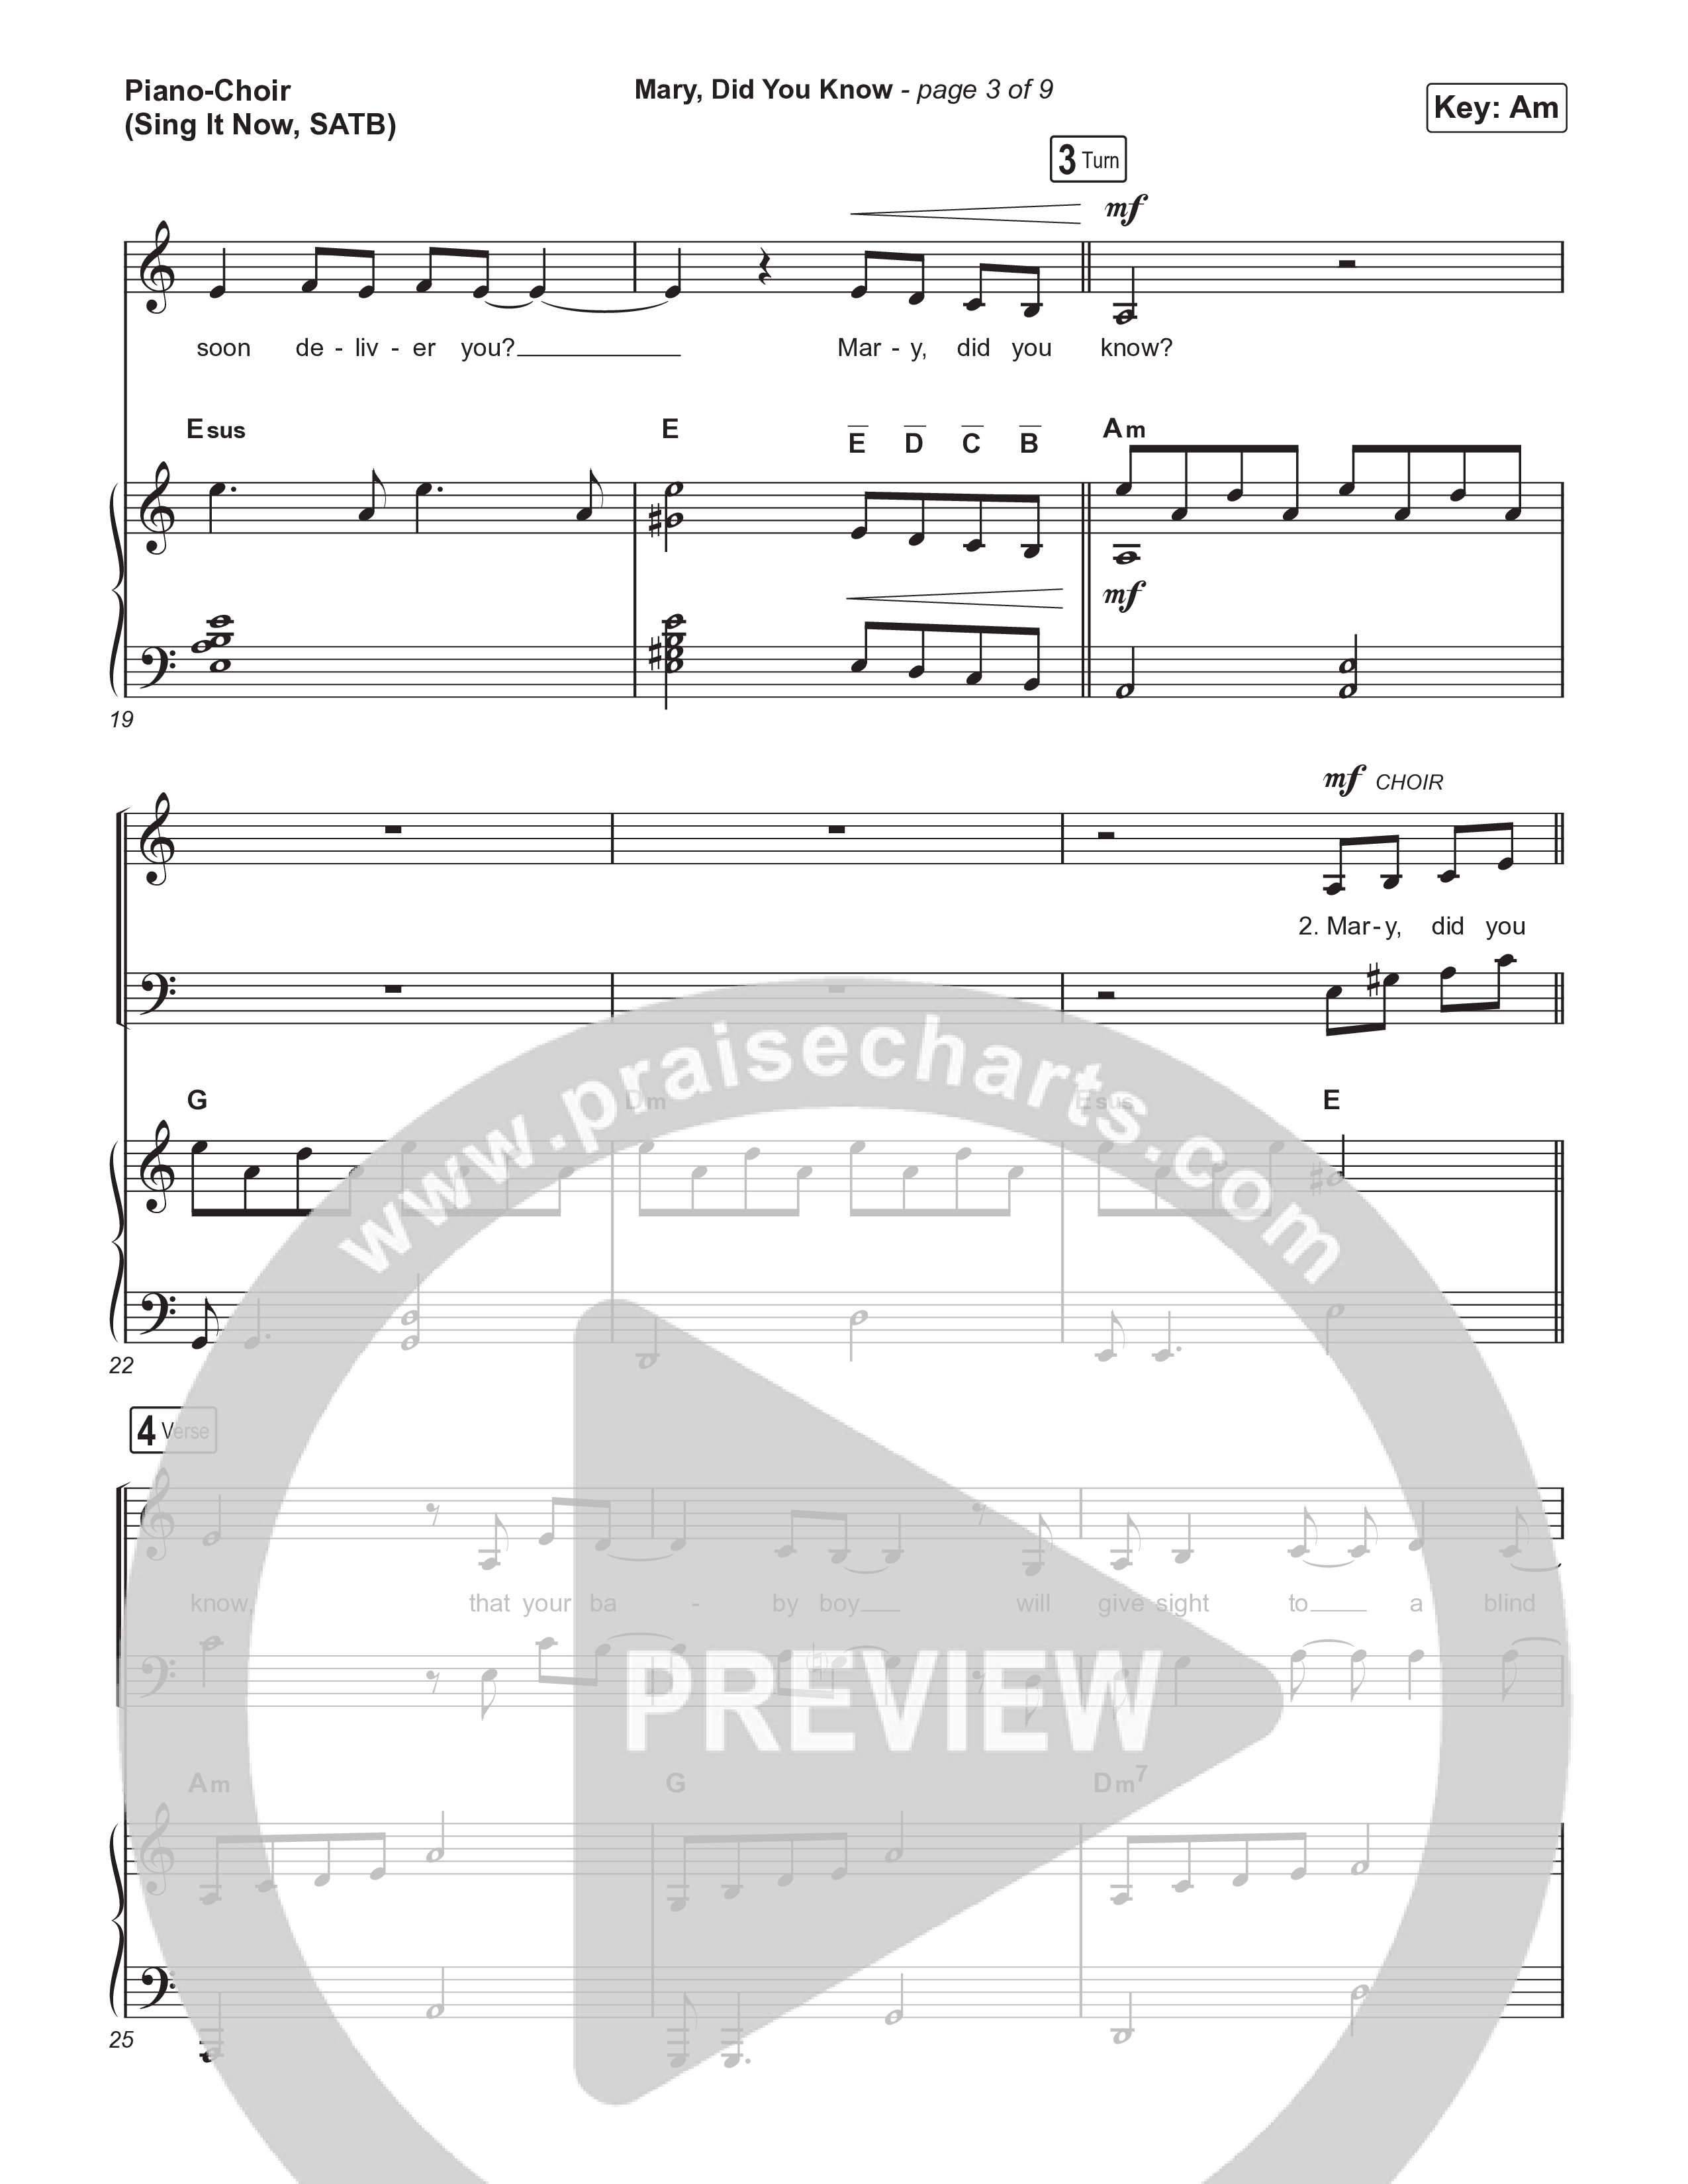 Mary Did You Know (Sing It Now) Piano/Choir (SATB) (Anne Wilson / Arr. Luke Gambill)